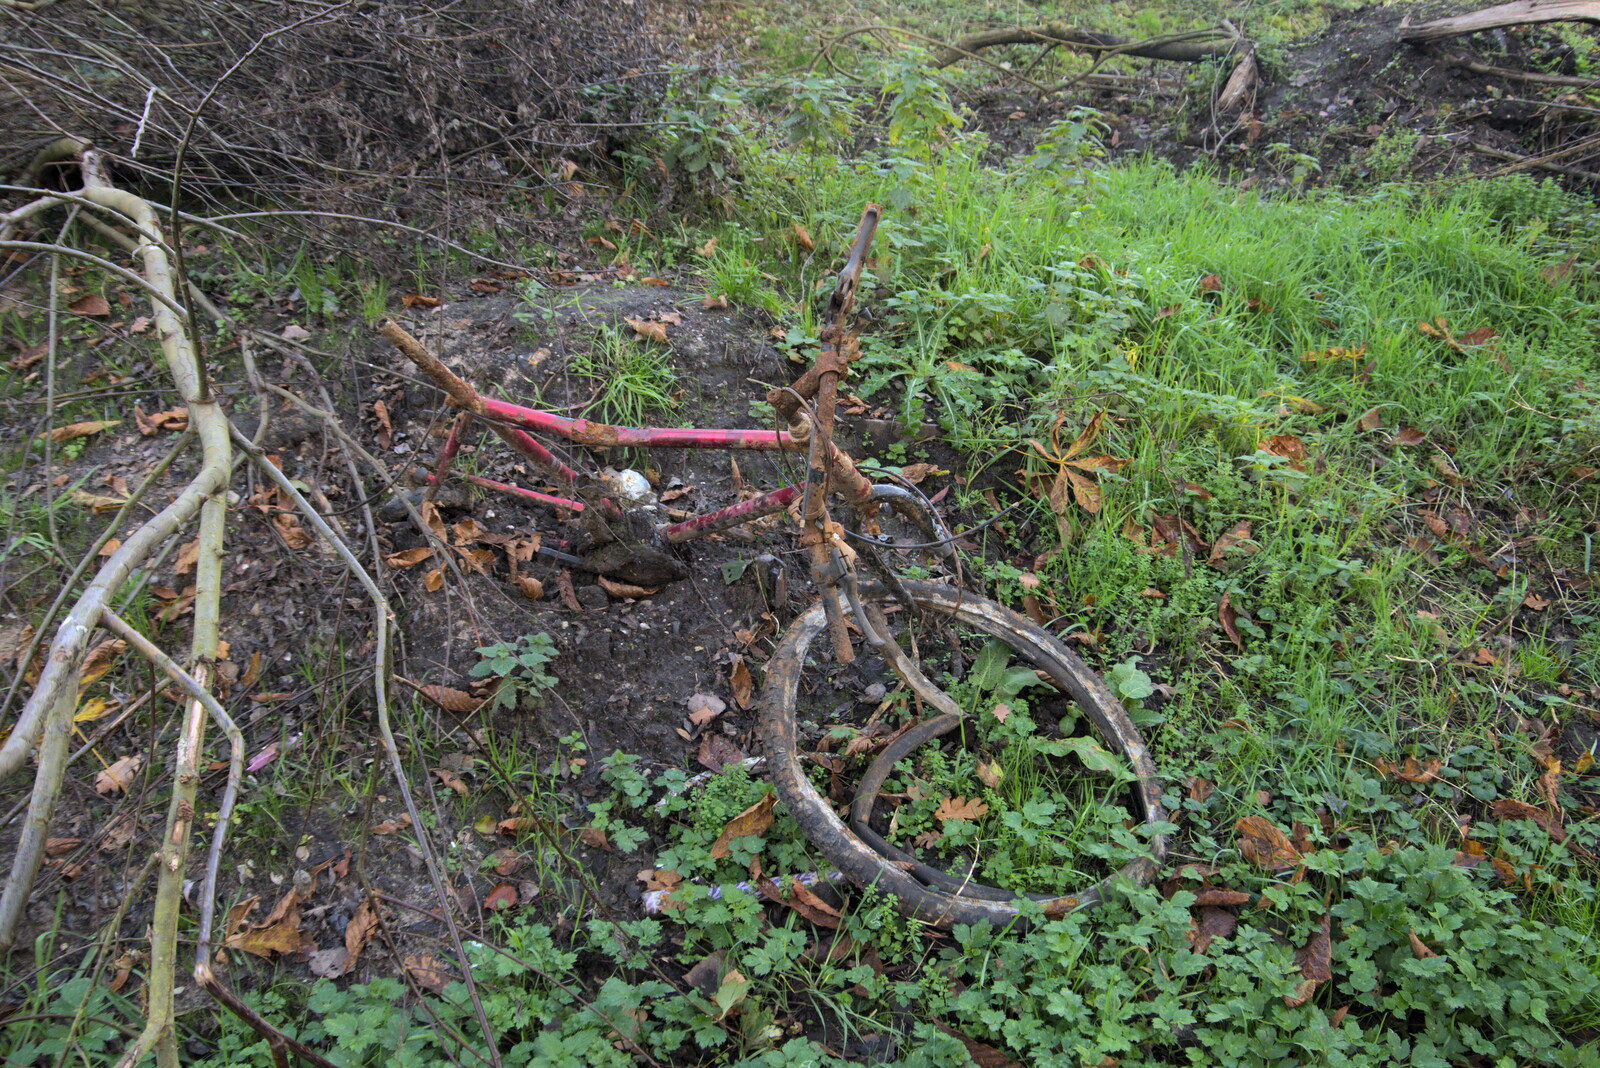 A wrecked bicycle is slowly consumed by mud from The Dereliction of Eye, Suffolk - 22nd November 2020